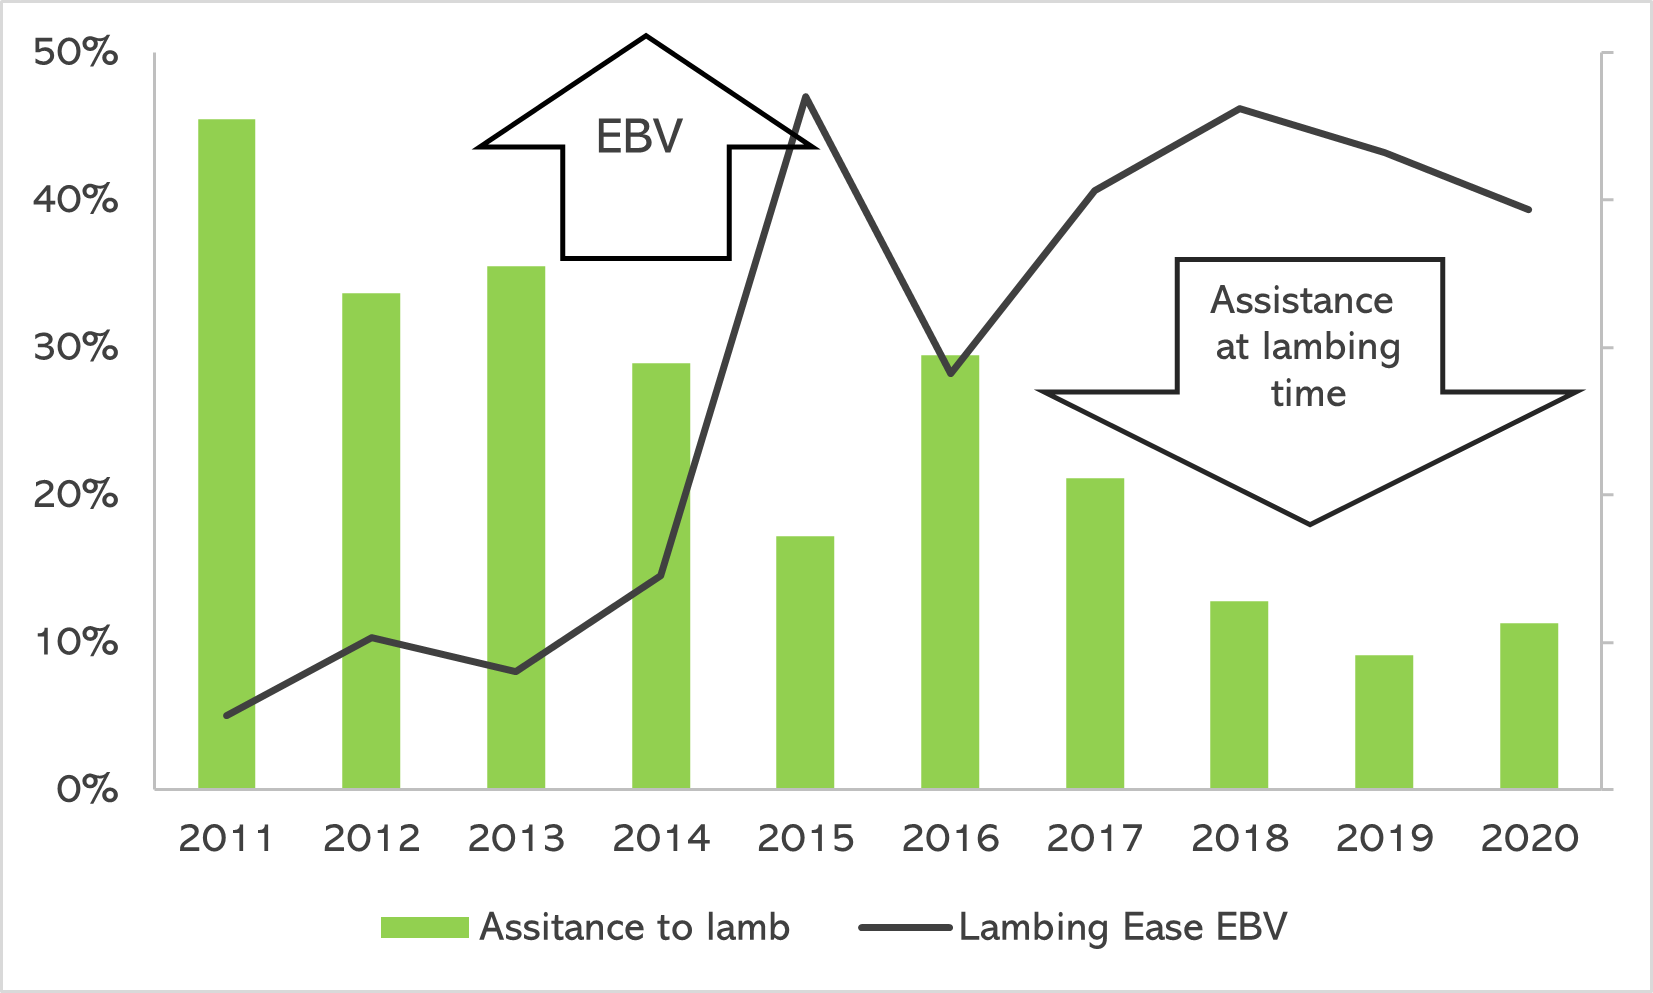 Sheep breeding data chart showing lambing ease and assistance to lamb data set values